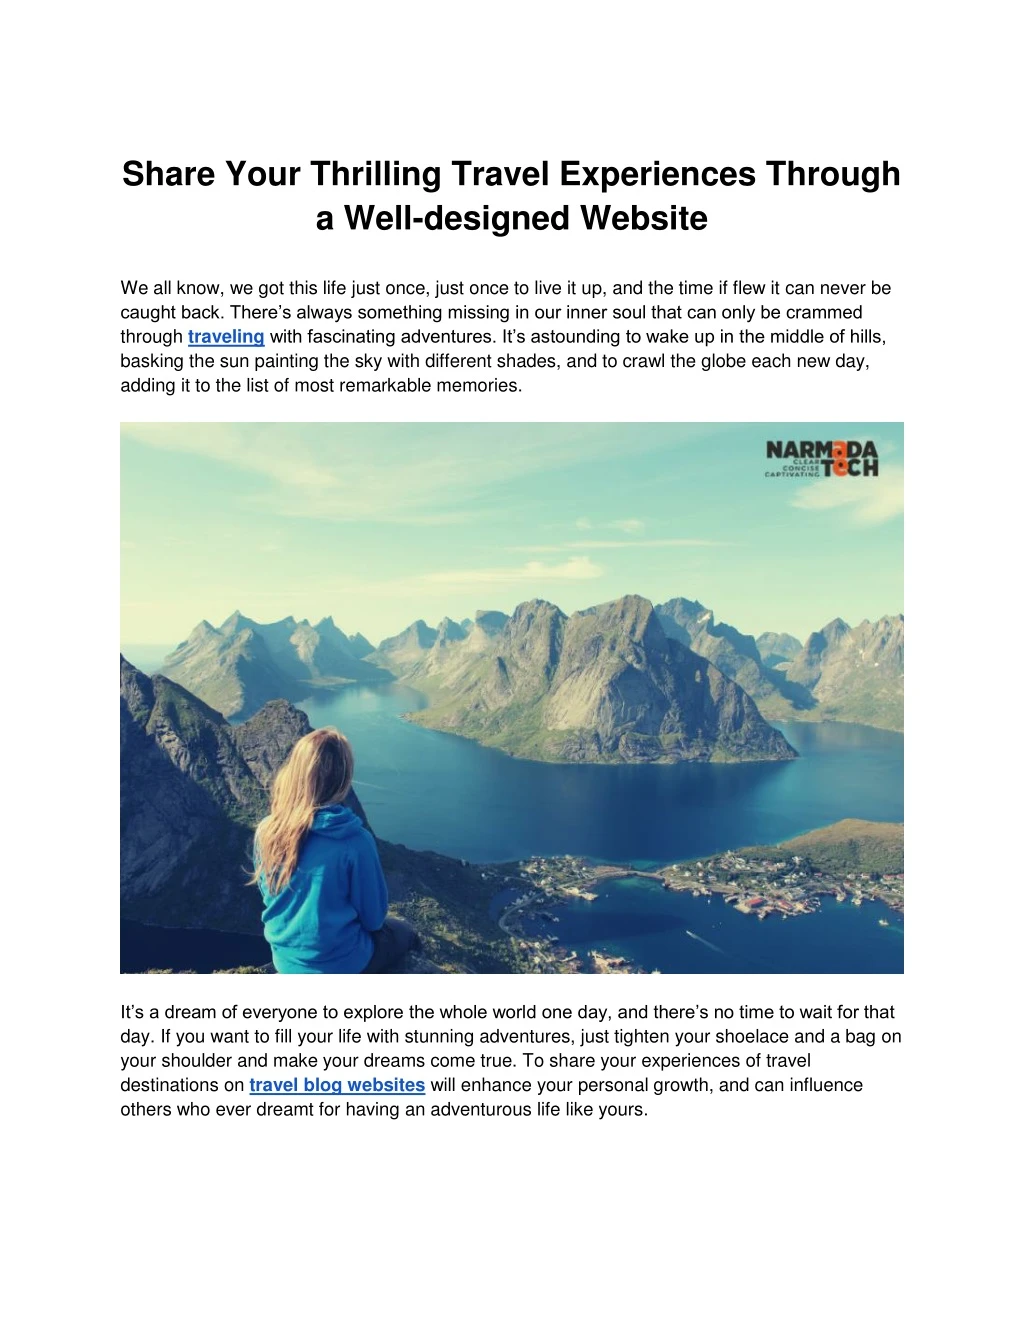 share your thrilling travel experiences through